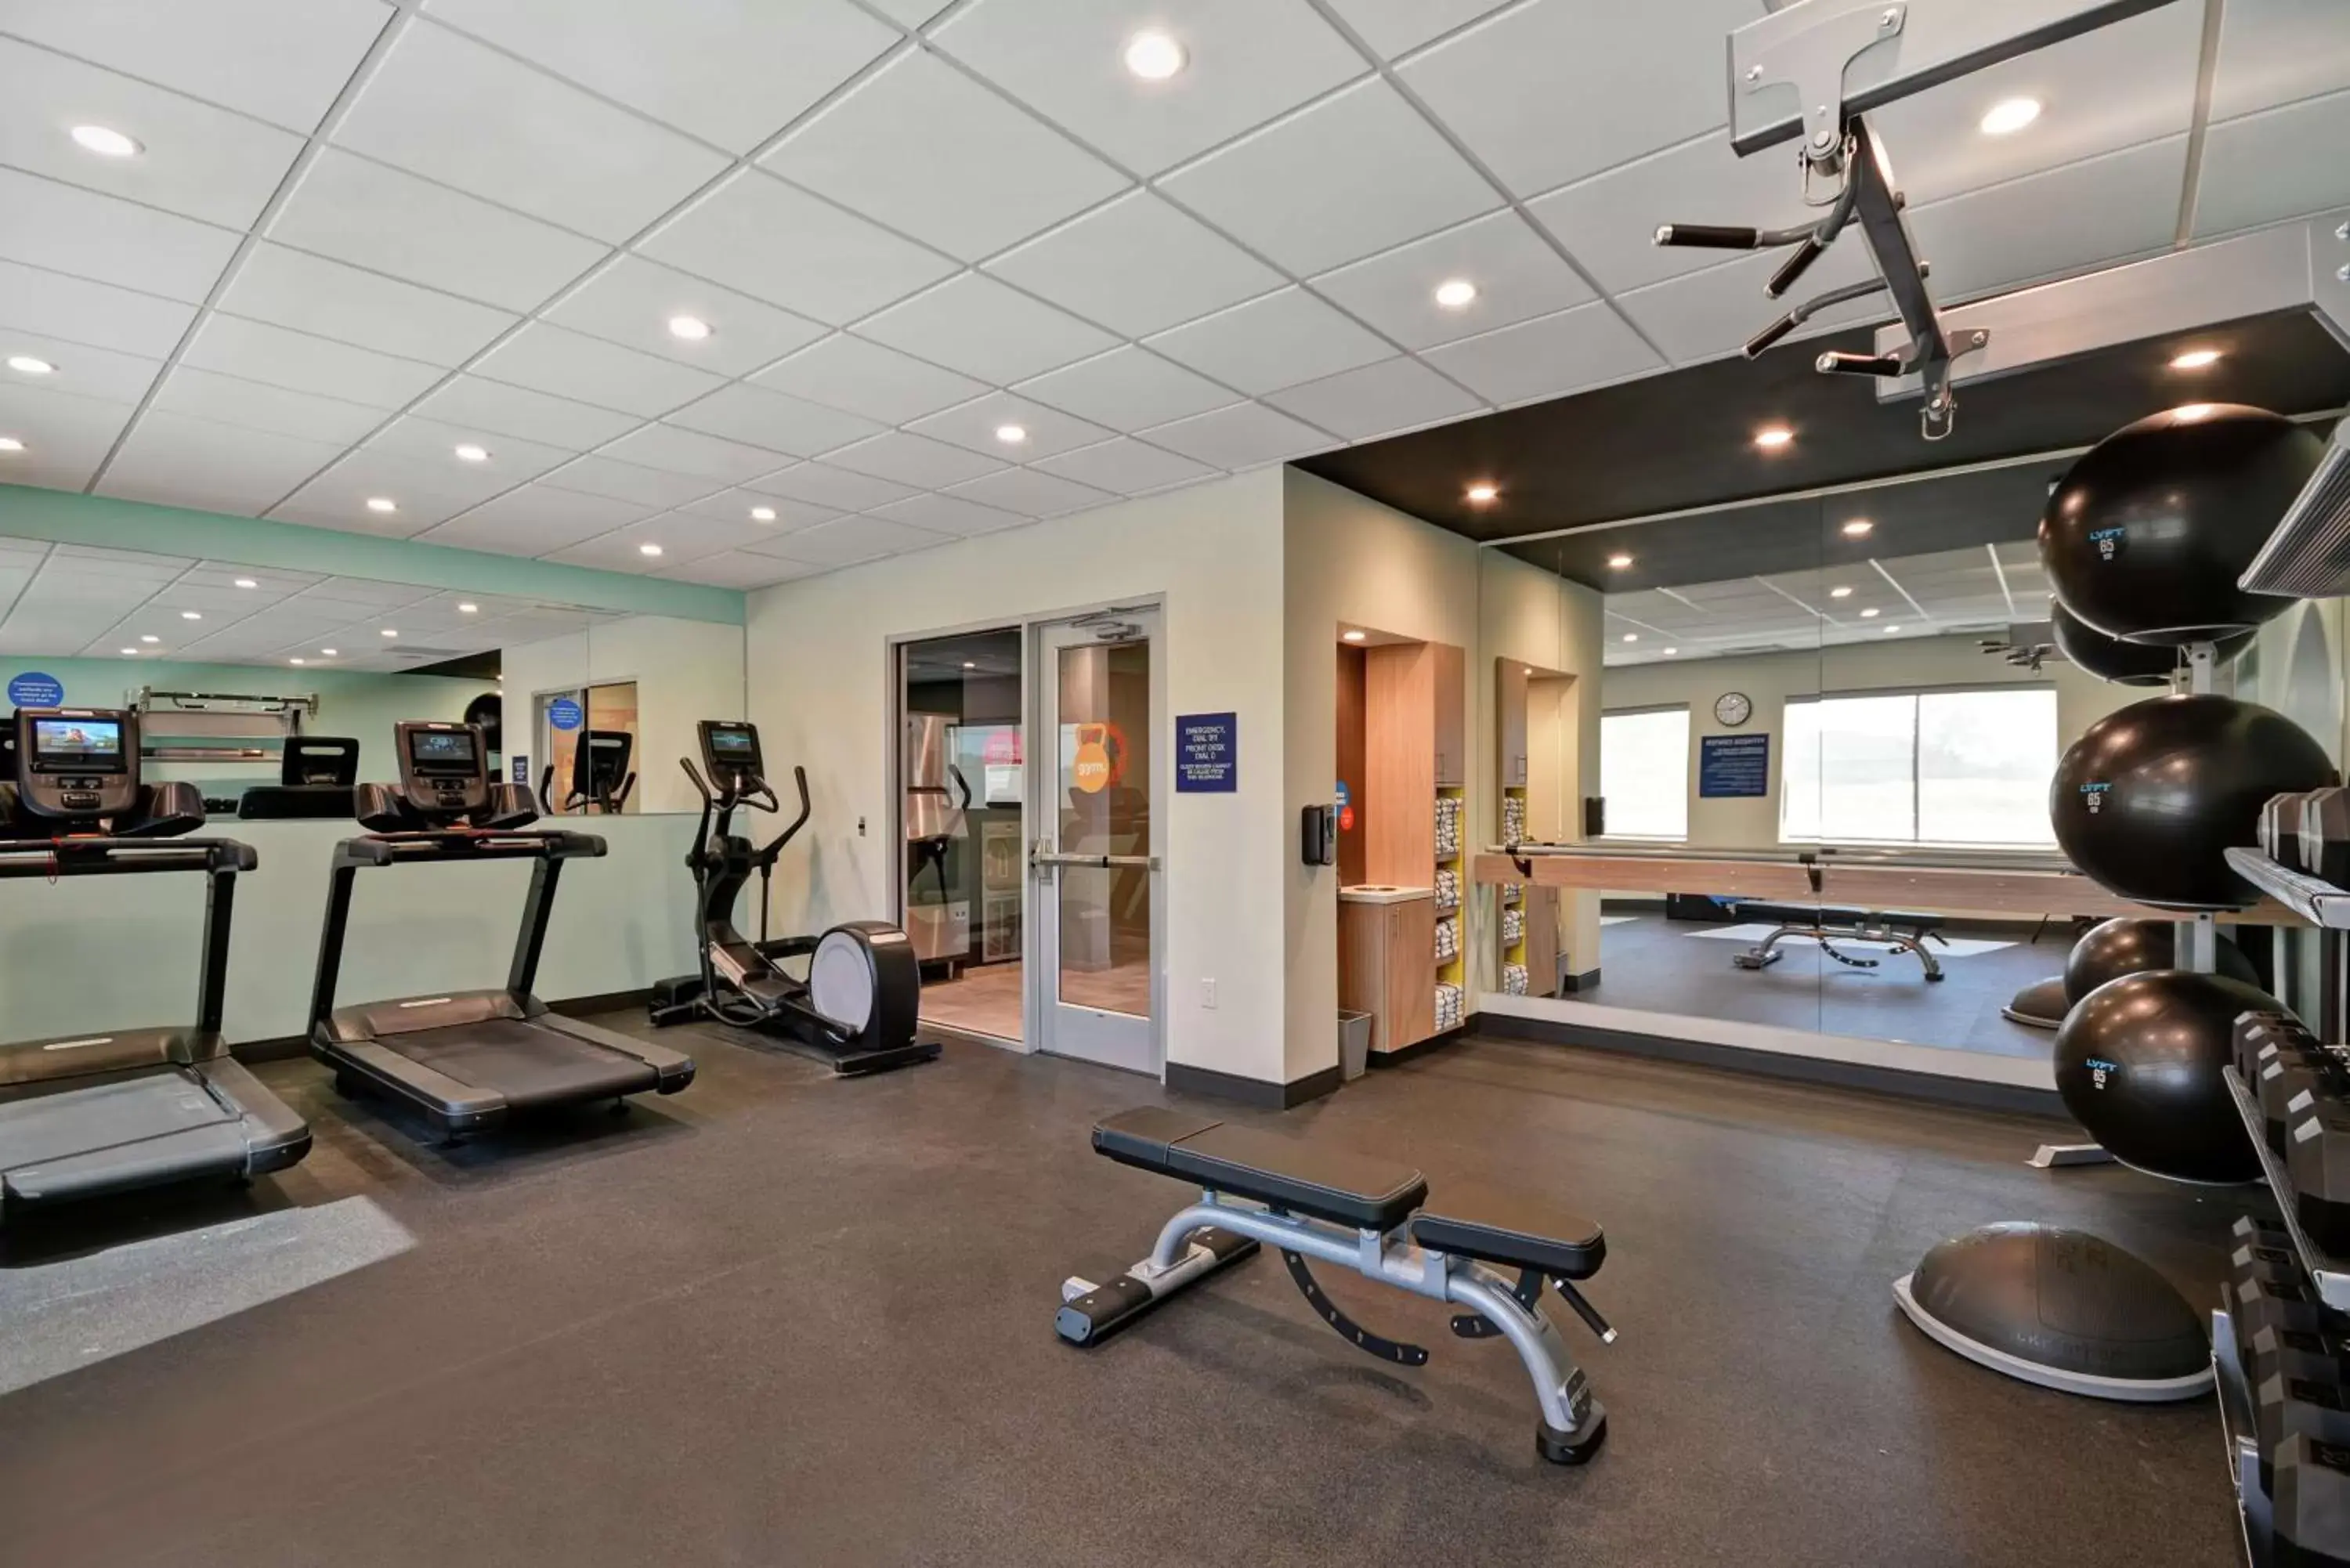 Fitness centre/facilities, Fitness Center/Facilities in Tru By Hilton Denver, PA